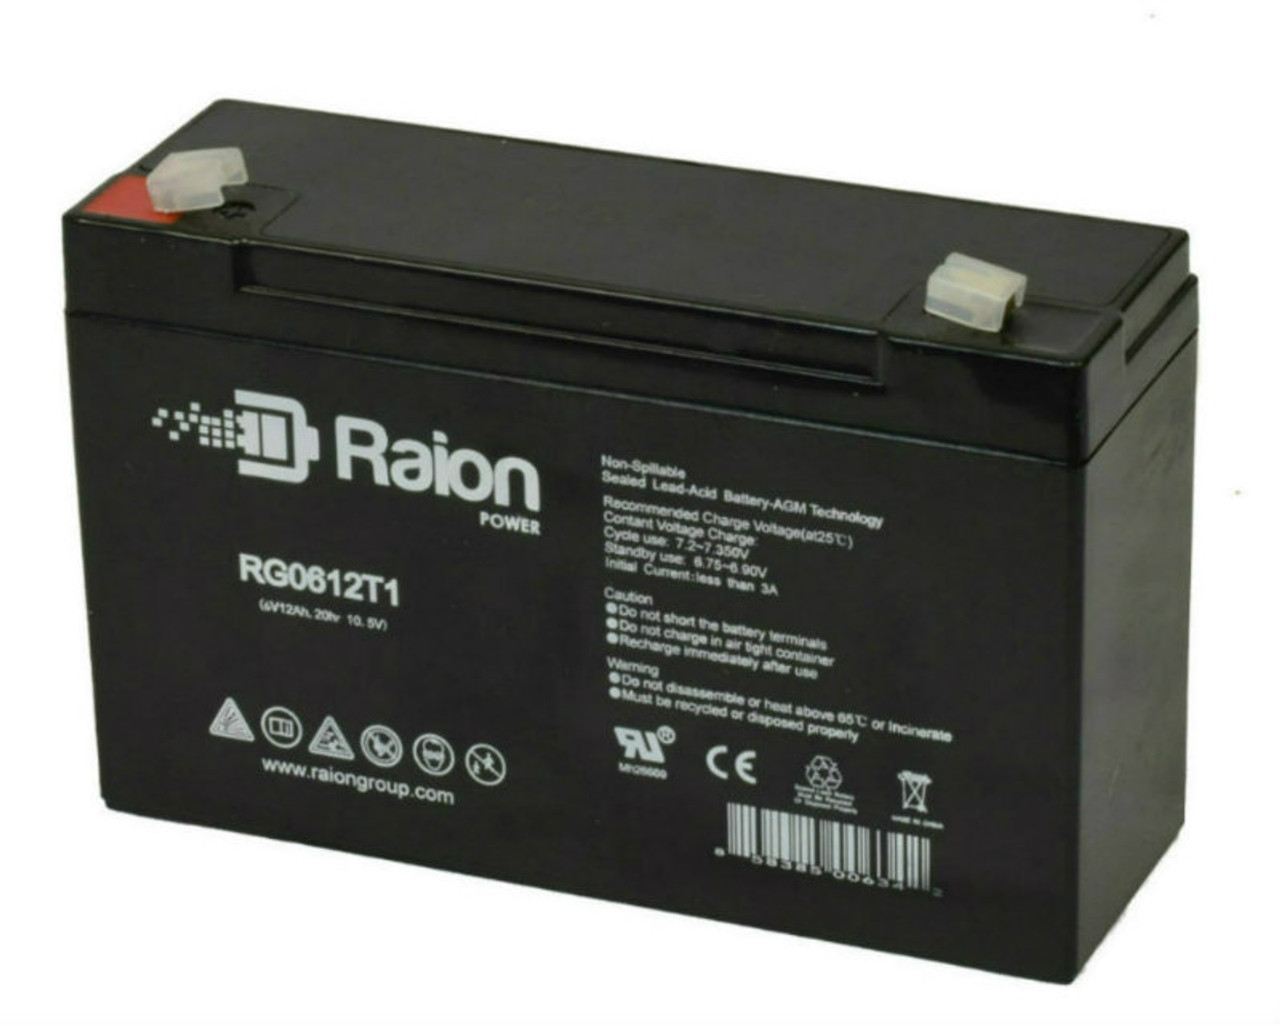 Raion Power RG06120T1 Replacement Emergency Light Battery for IBT BT12-6